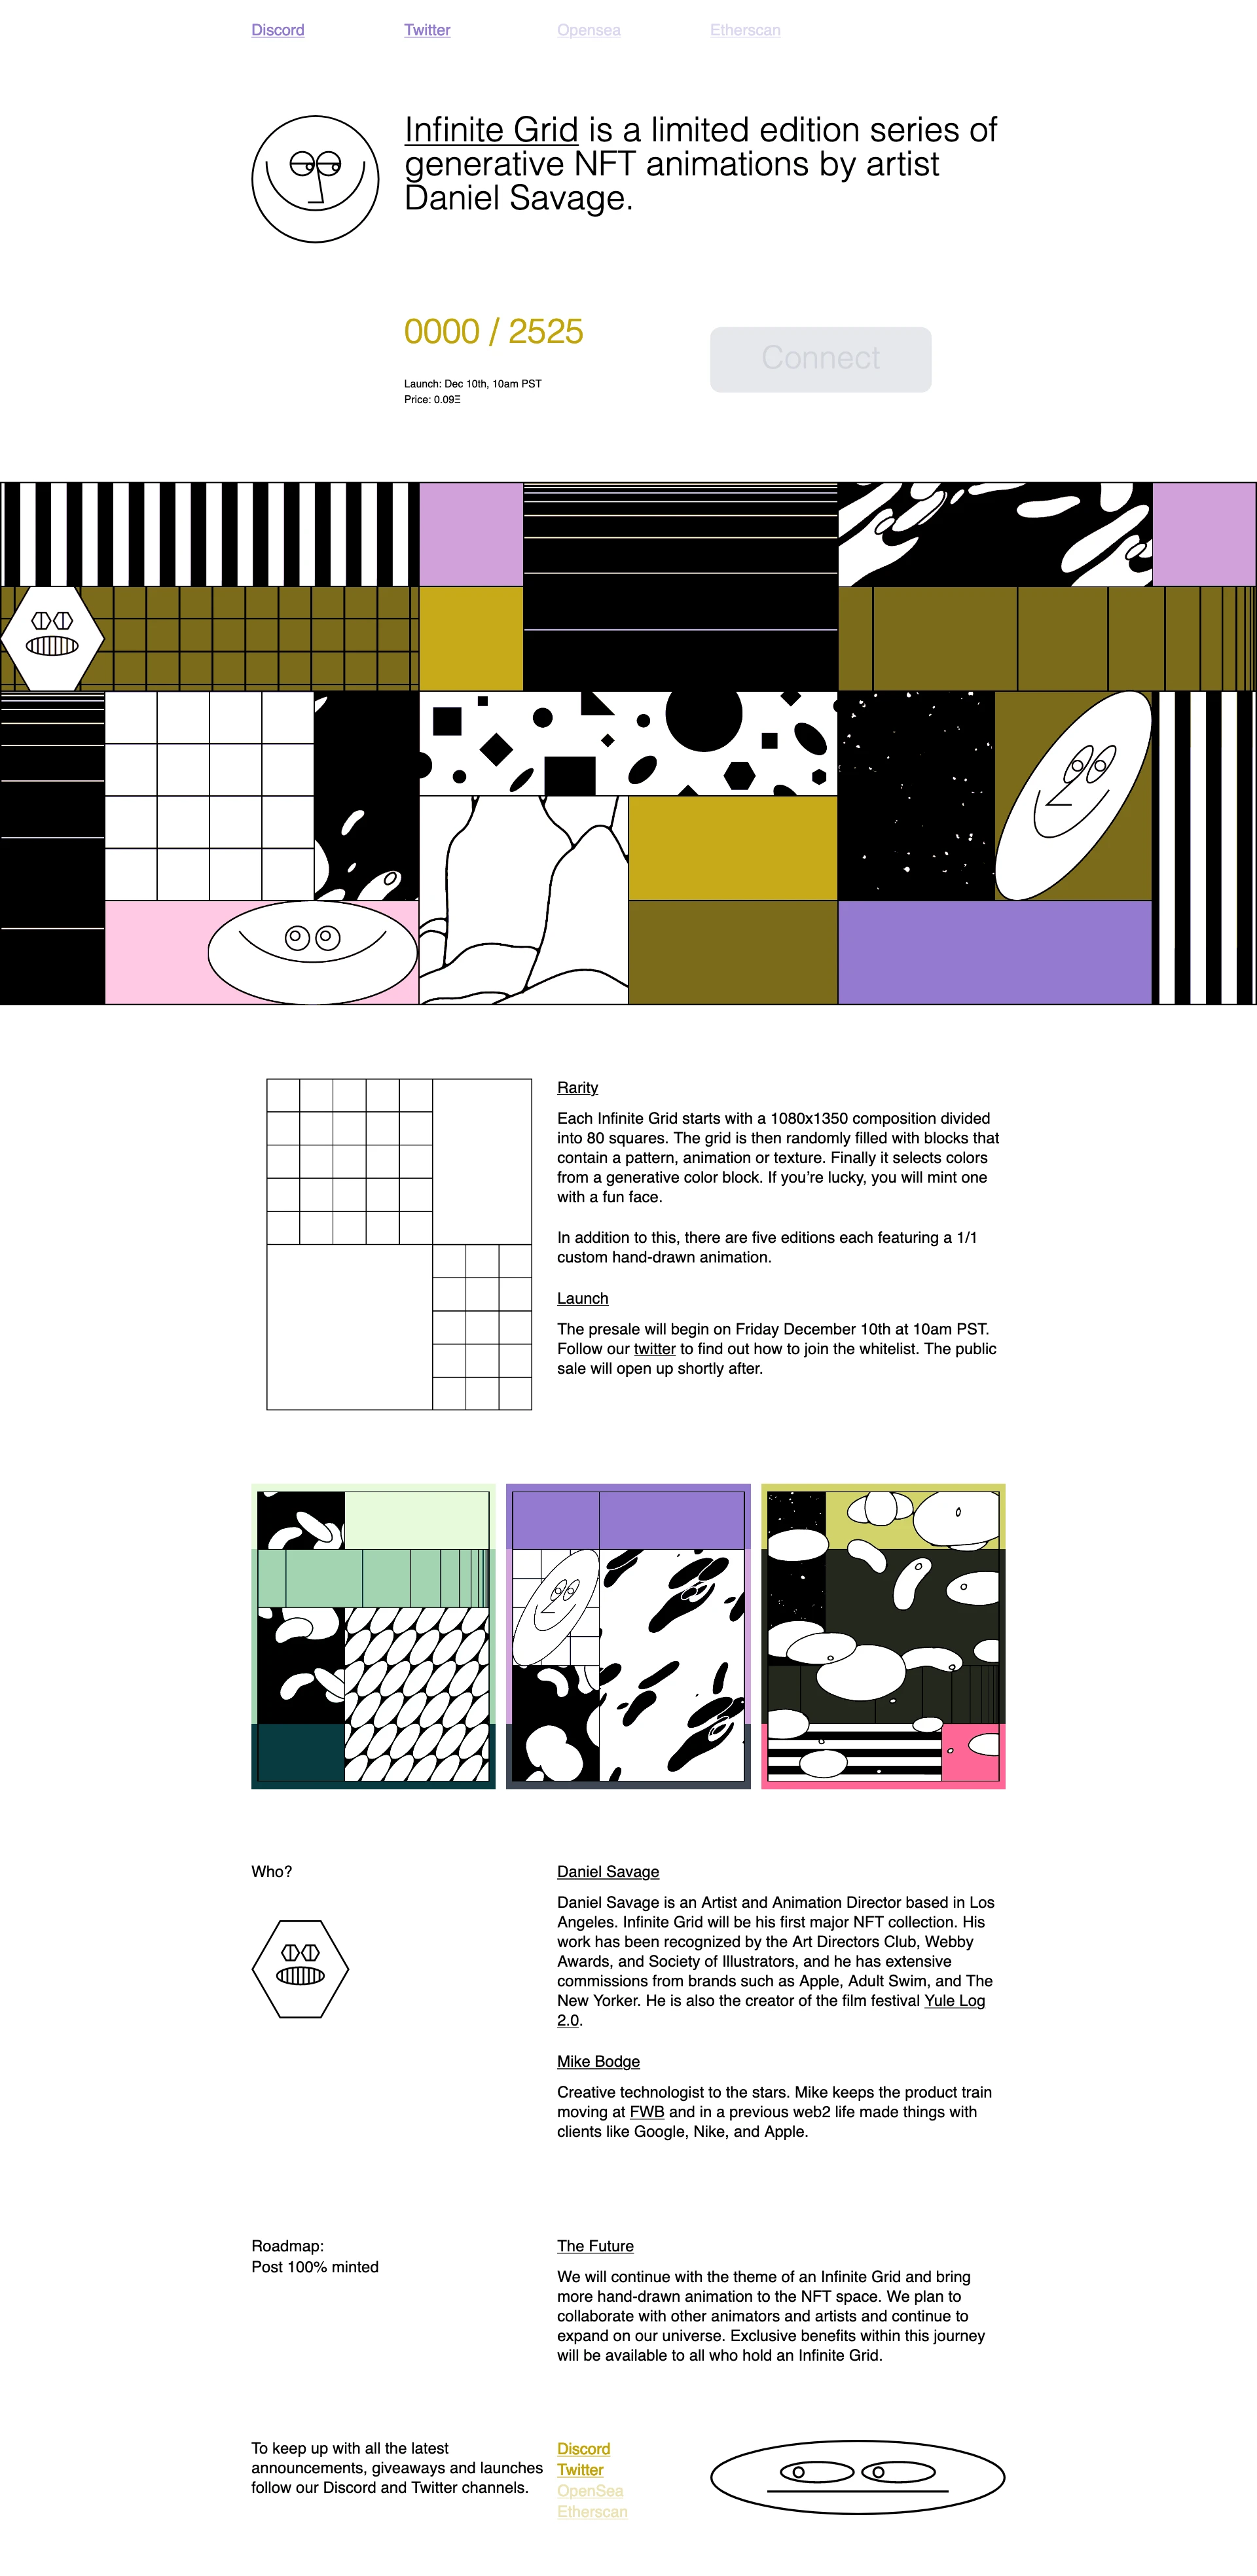 Infinite Grid Landing Page Example: Infinite Grid is a limited edition series of generative NFT animations by artist Daniel Savage.